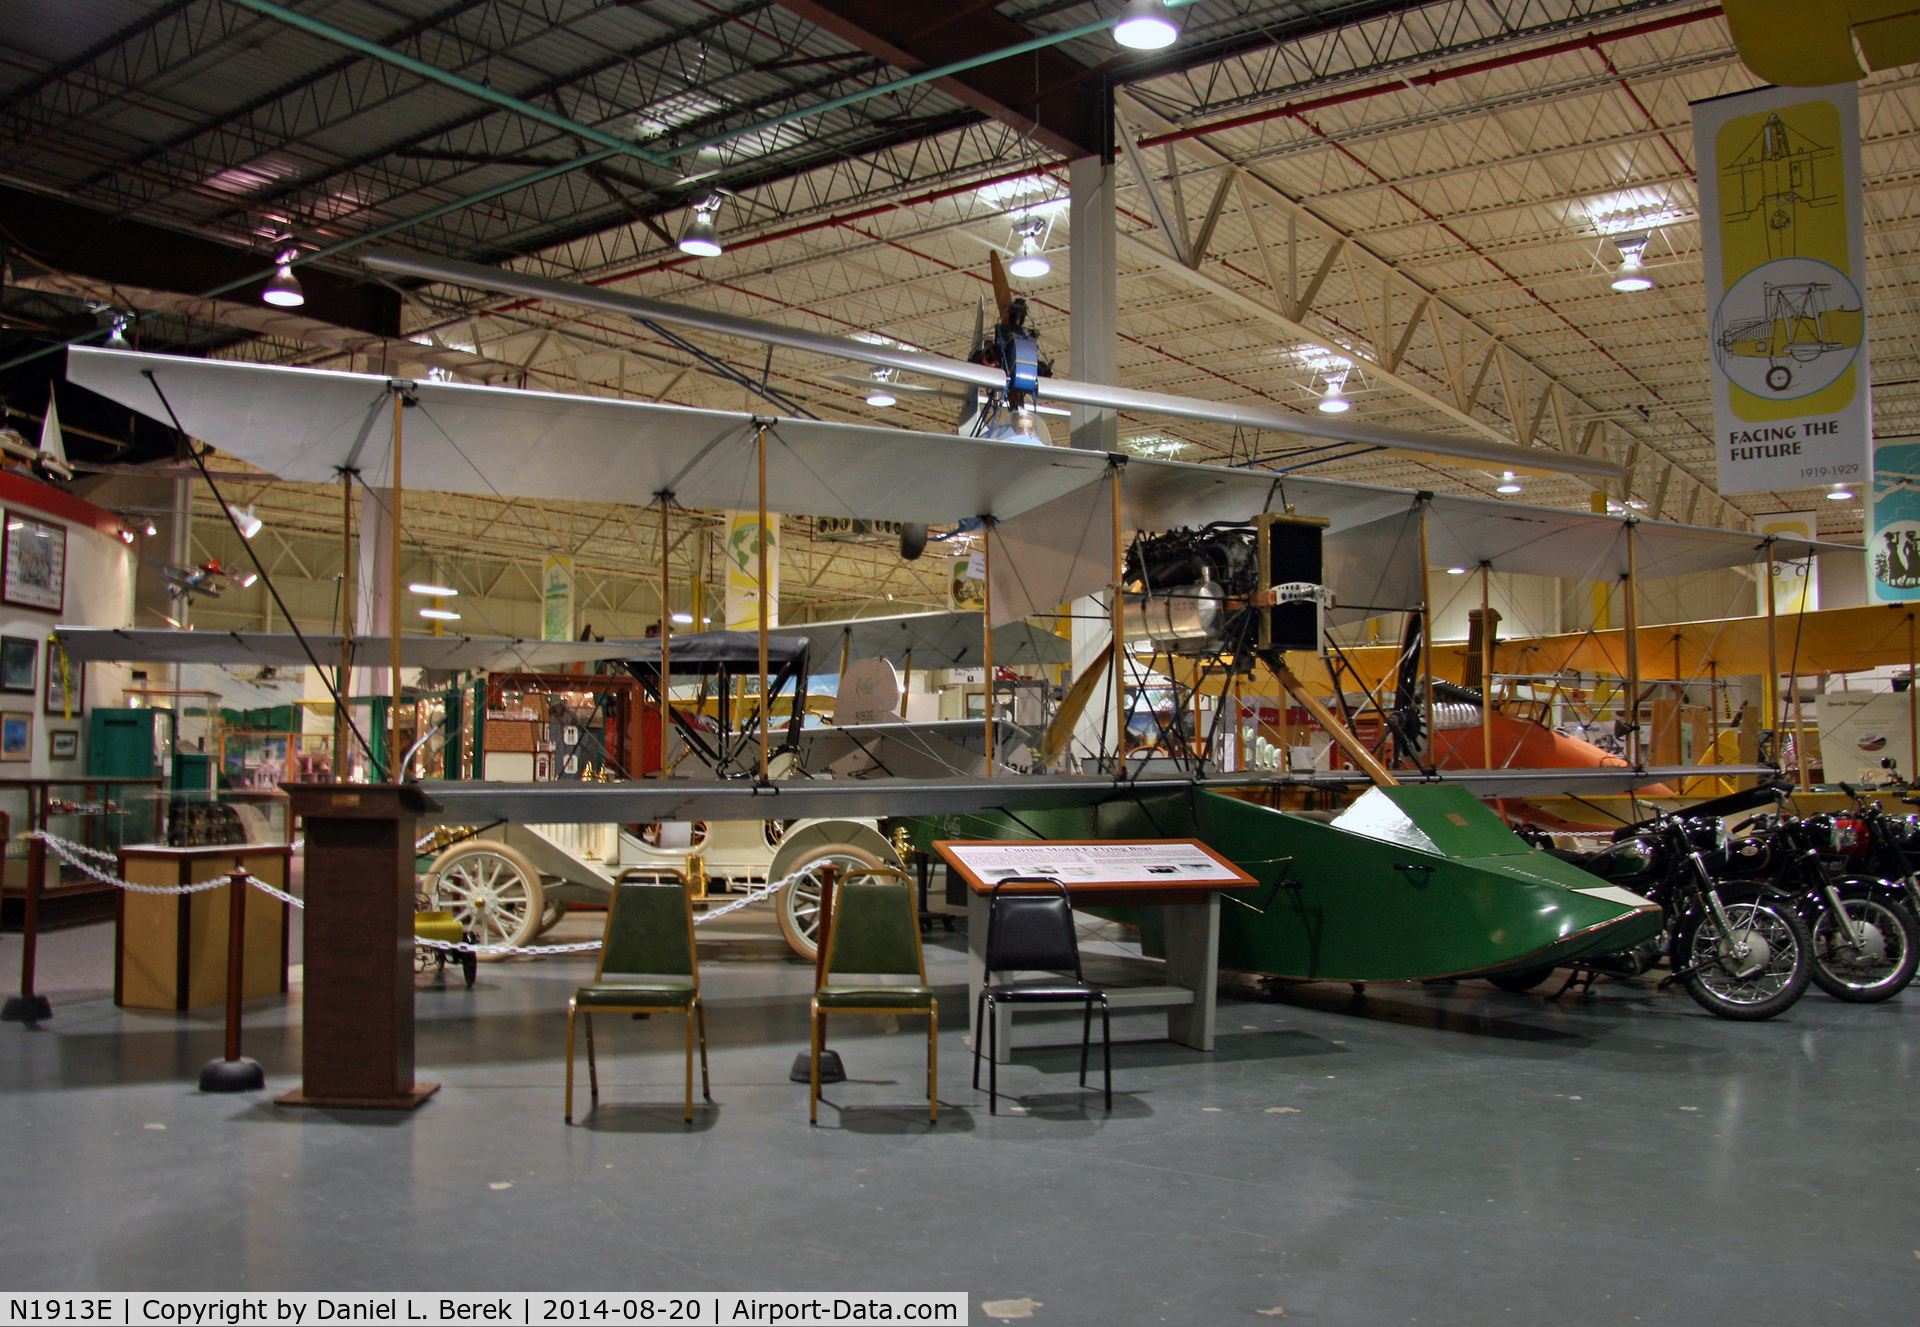 N1913E, 1998 Curtiss Model E Flying Boat Replica C/N 001, This beautiful reproduction is at the Glenn H. Curtiss Museum.  The only original is a hull at the NASM; the Curtiss Museum also has a propeller.  The original design dates to 1913.